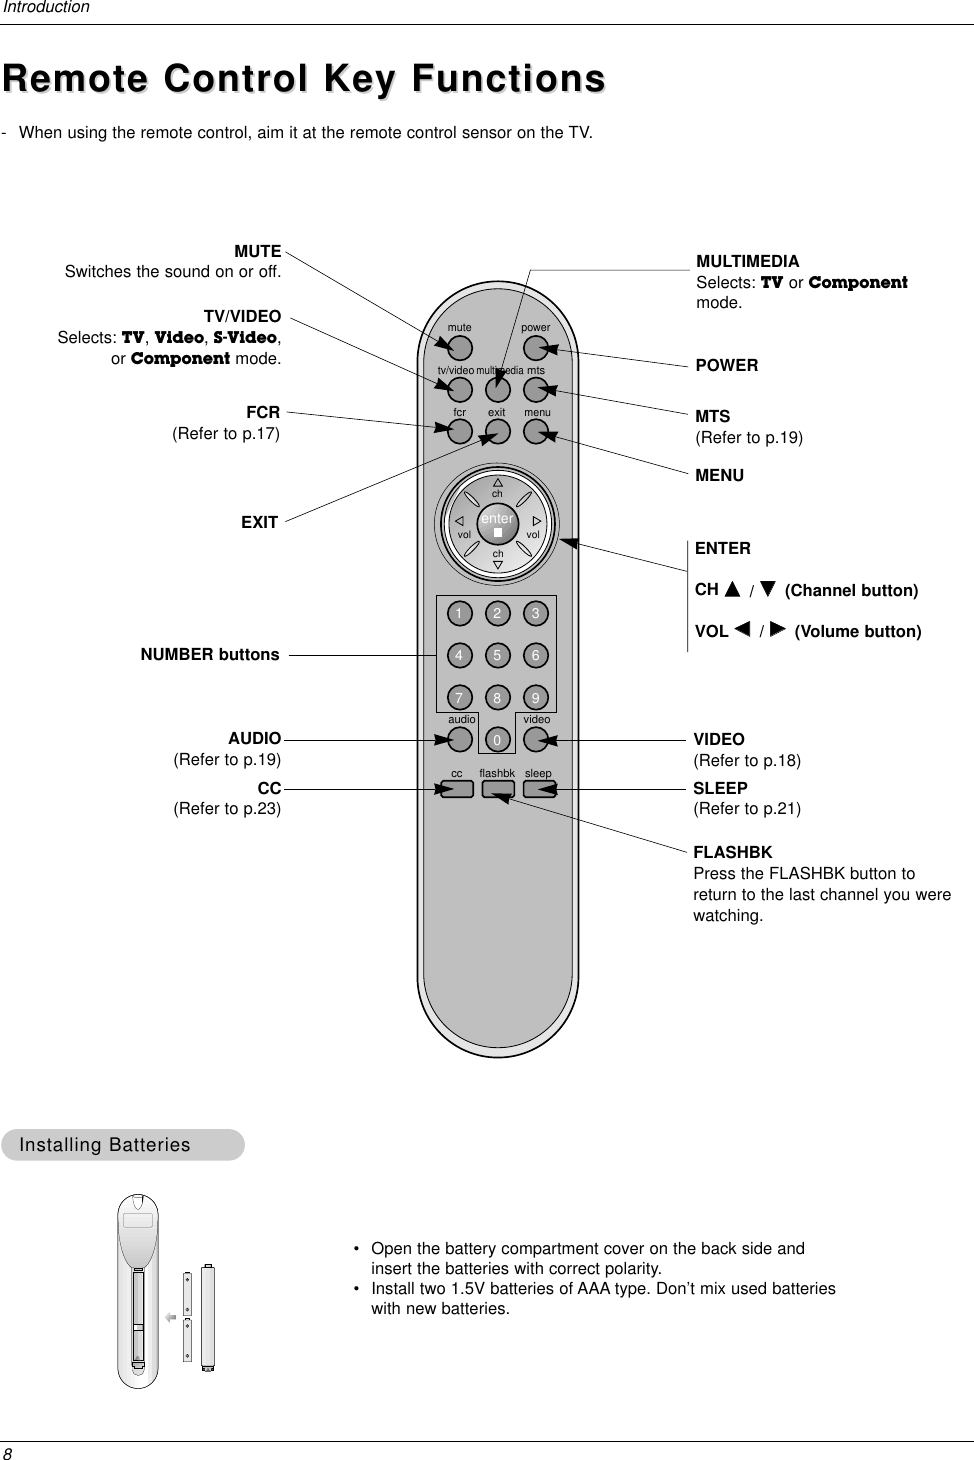 8Introduction- When using the remote control, aim it at the remote control sensor on the TV.powermutetv/videomultimediamtsfcrchchvolenter1234567890volexitmenuaudioflashbkcc sleepvideoMUTESwitches the sound on or off.ENTERCH DD  / EE  (Channel button)VOL FF  / GG  (Volume button)POWERMTS(Refer to p.19)EXITMENUMULTIMEDIASelects: TV or Componentmode.VIDEO(Refer to p.18)SLEEP(Refer to p.21)FLASHBKPress the FLASHBK button toreturn to the last channel you werewatching.AUDIO(Refer to p.19)CC(Refer to p.23)TV/VIDEOSelects: TV, Video, S-Video,or Component mode.FCR(Refer to p.17)NUMBER buttons•Open the battery compartment cover on the back side andinsert the batteries with correct polarity.•Install two 1.5V batteries of AAA type. Don’t mix used batterieswith new batteries.Installing BatteriesInstalling BatteriesRemote Control Key FunctionsRemote Control Key Functions